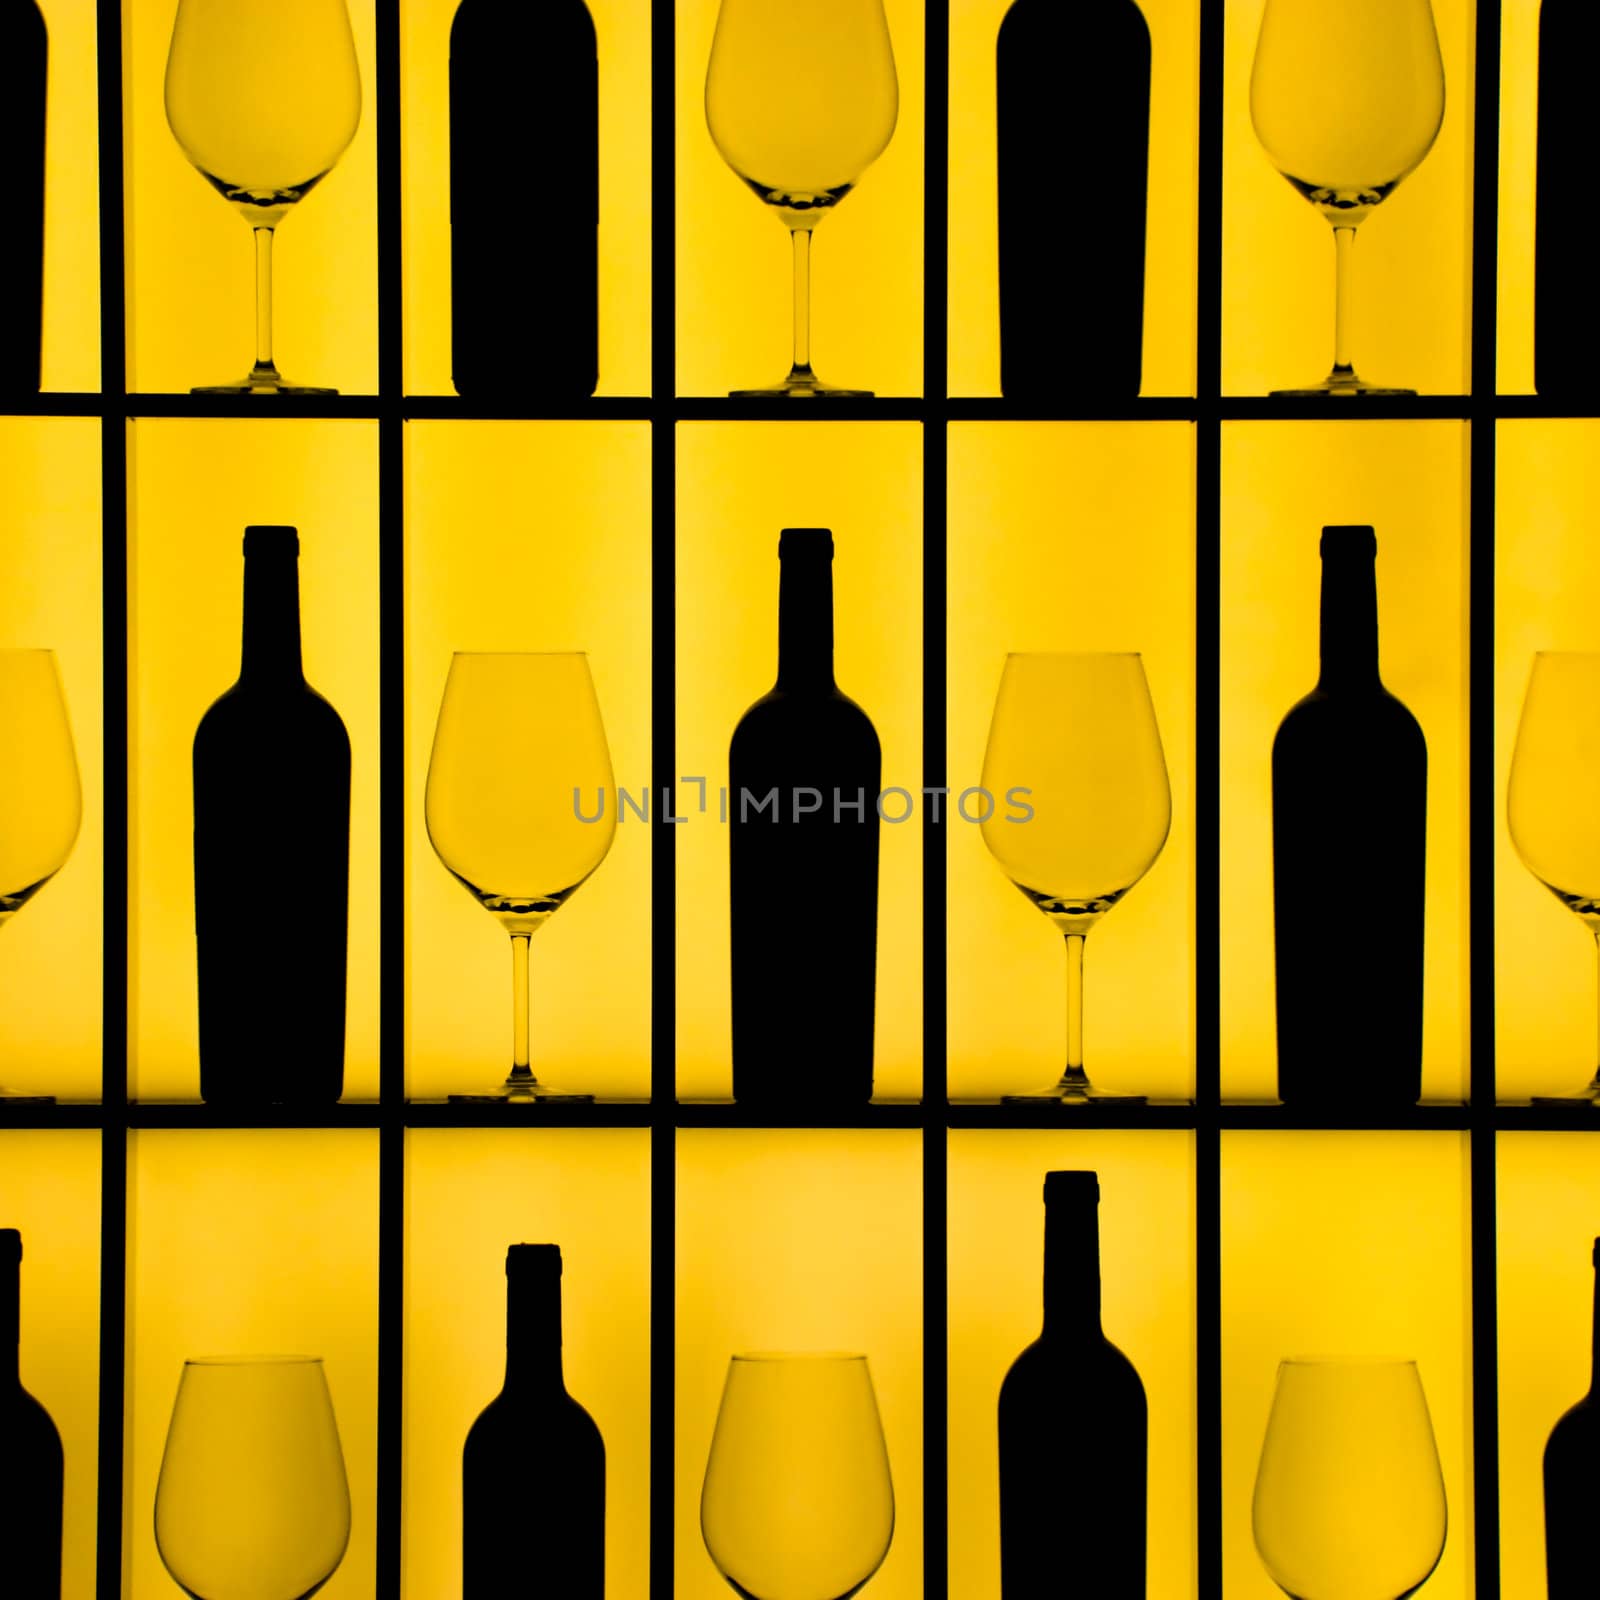 Black bottles and crystal glasses with a yellow backlight